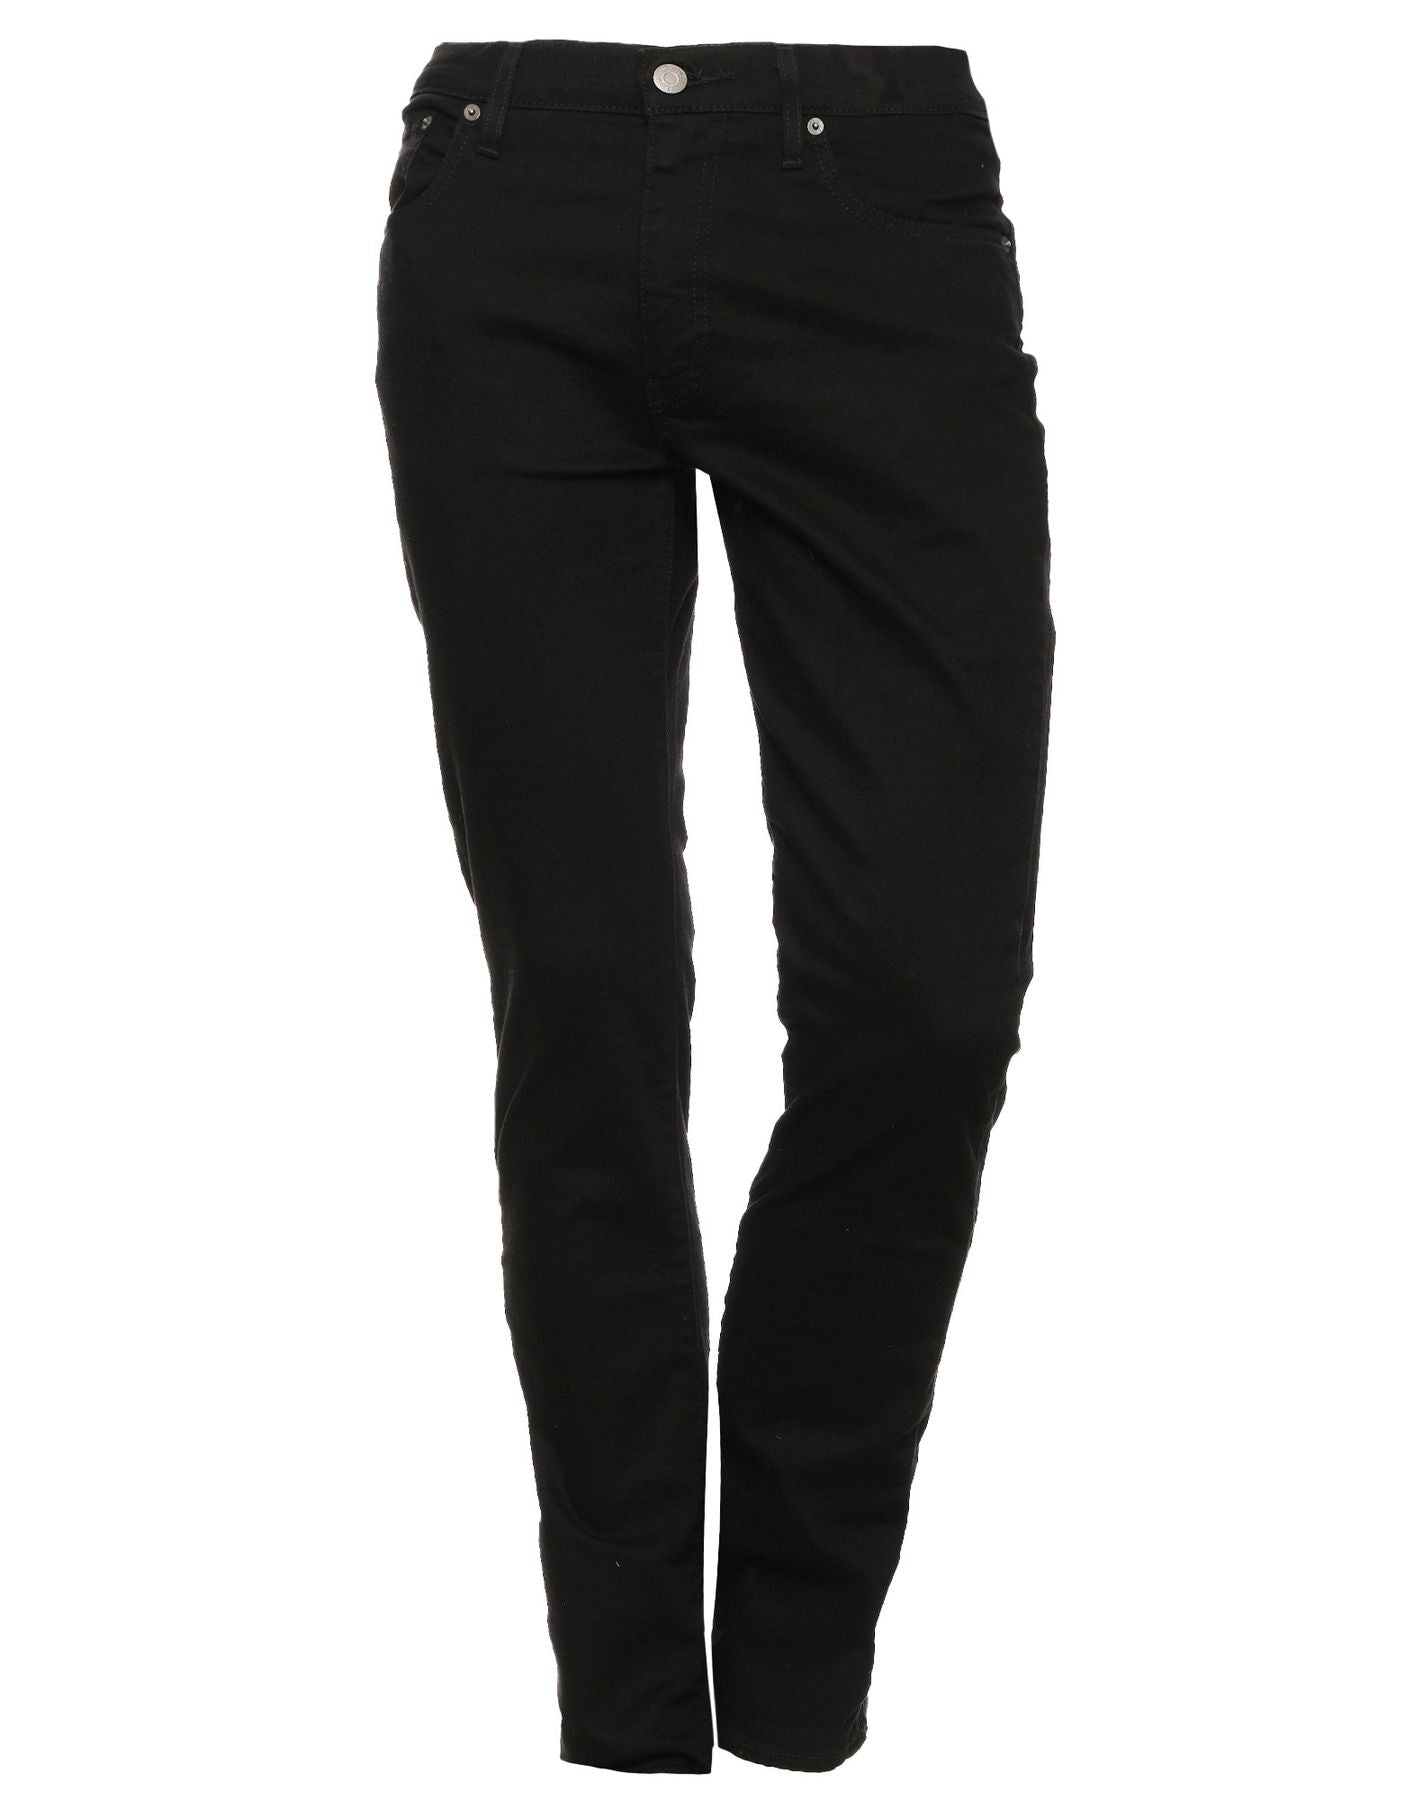 Jeans for man 04511 1507 NIGHTSHINE Levi's